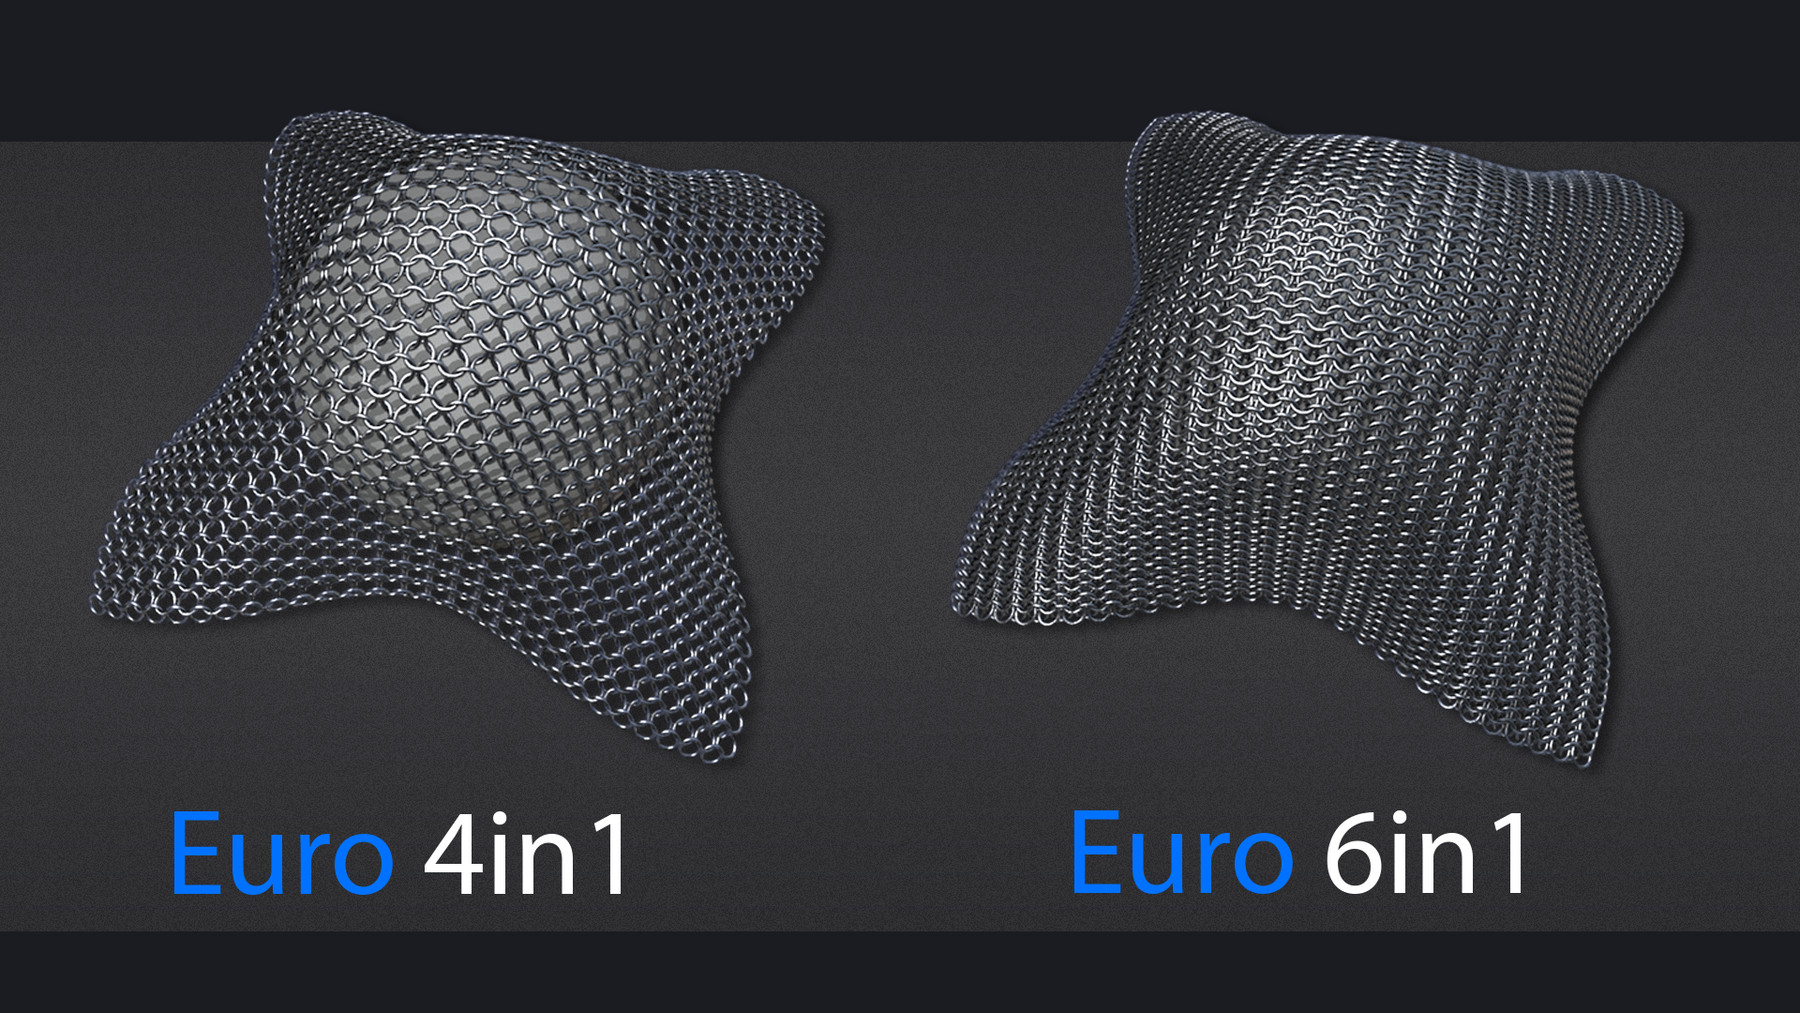 ArtStation - Chainmail patterns | Brushes